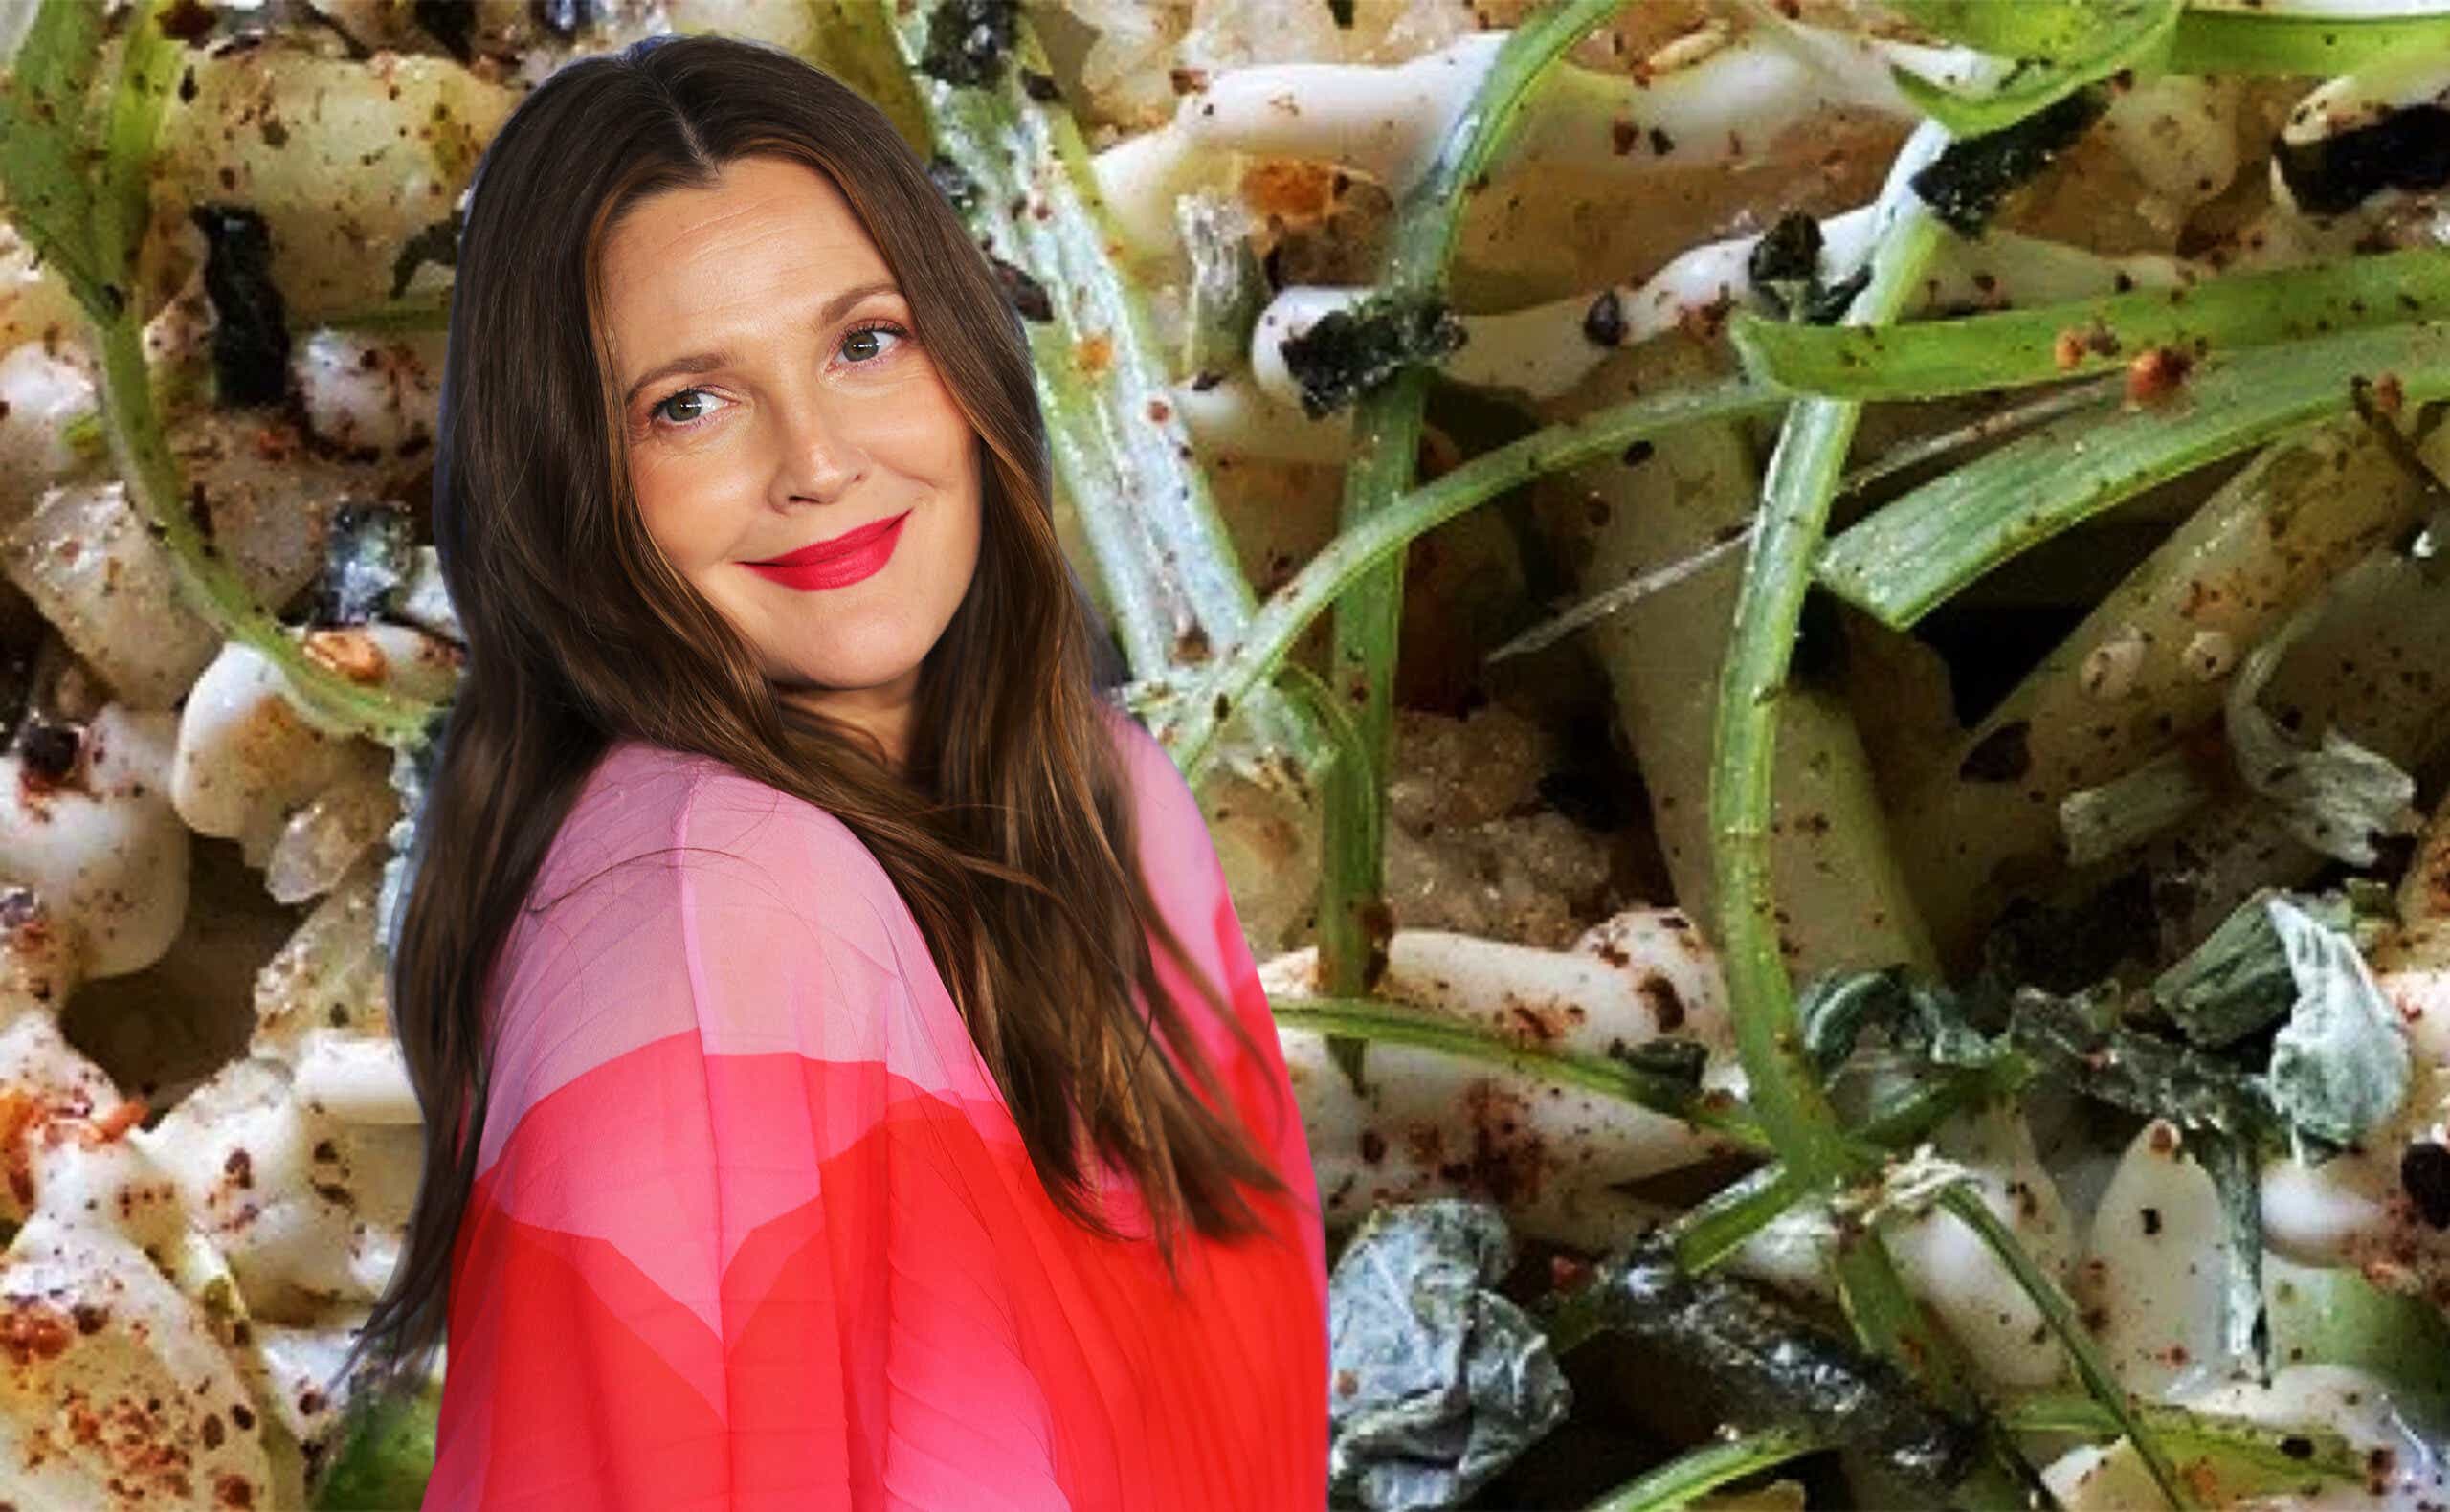 Drew Barrymore poses in front of an image of rice.